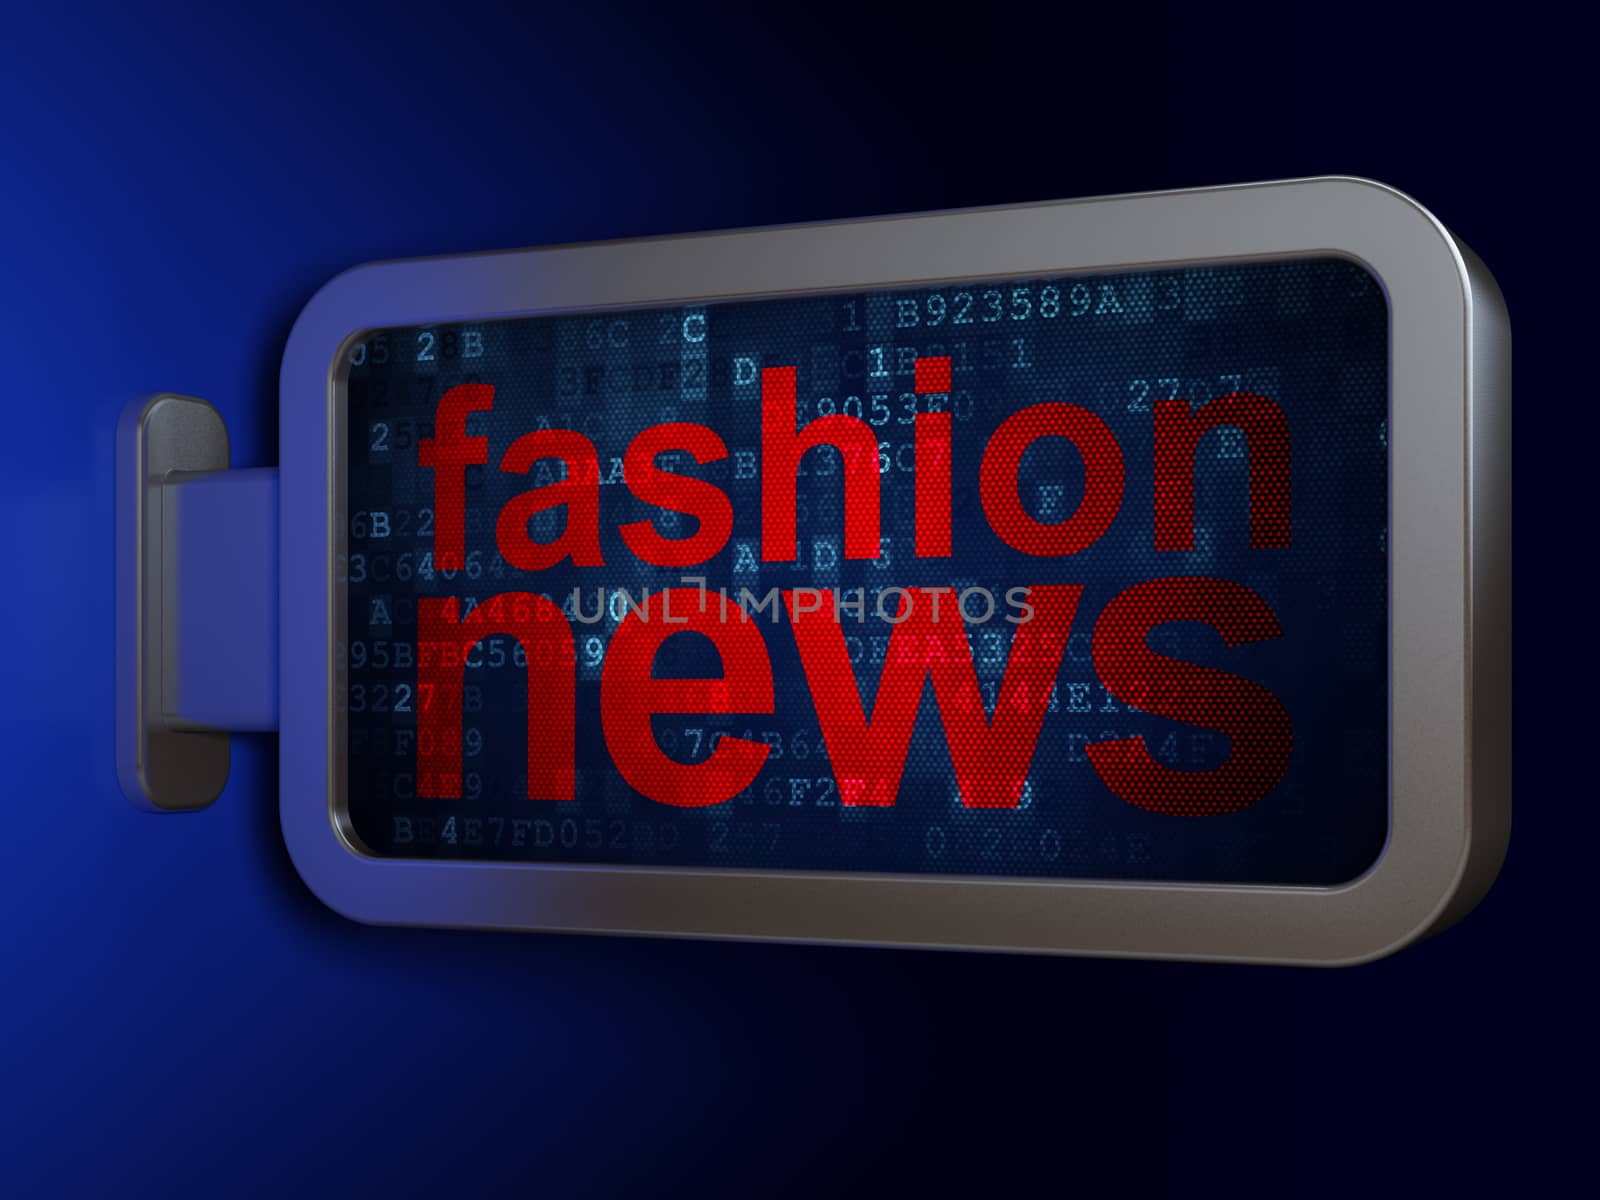 News concept: Fashion News on advertising billboard background, 3D rendering